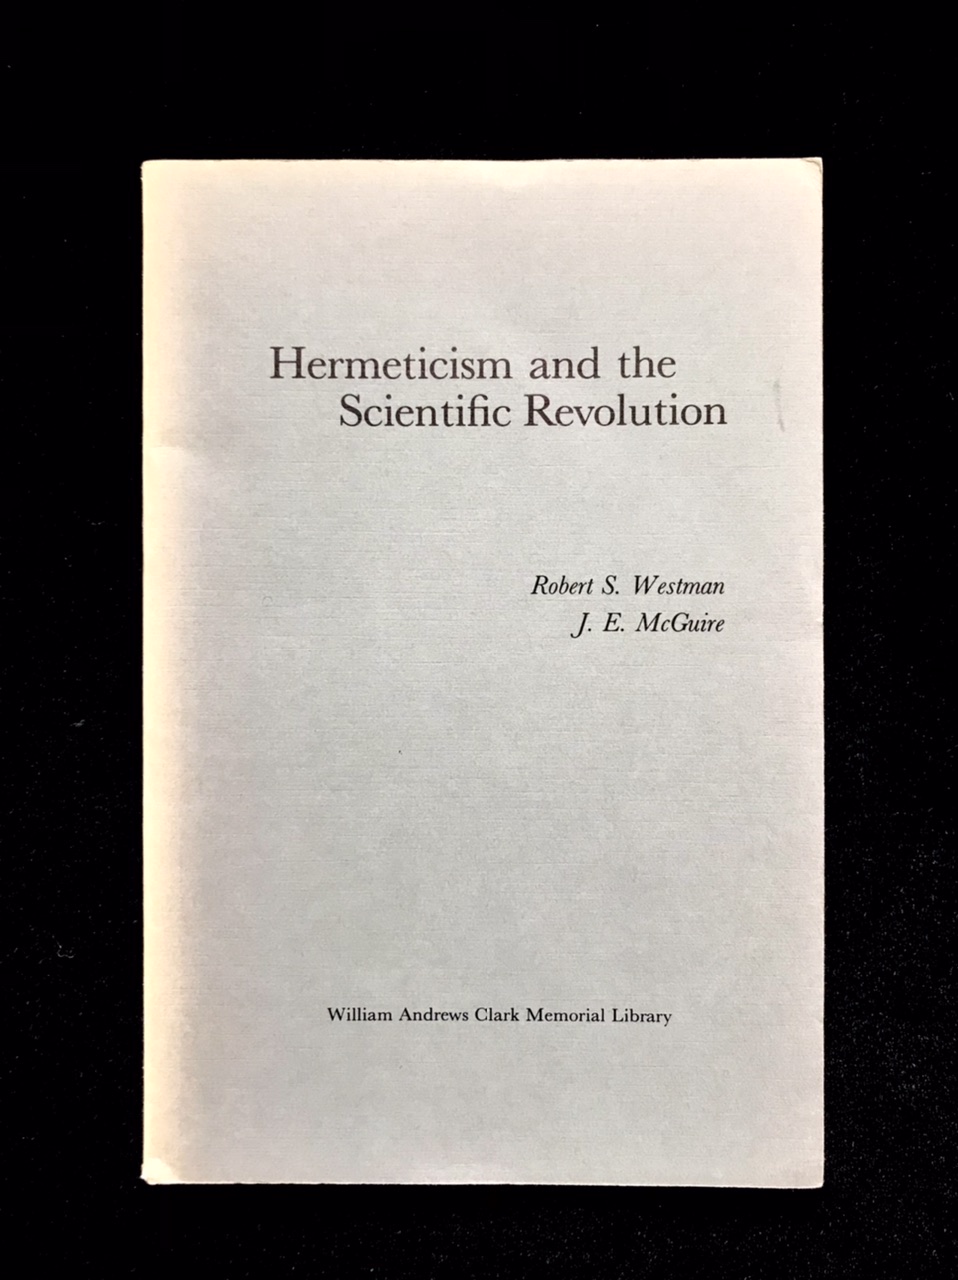 Hermeticism And The Scientific Revolution by R. S. Westman & J. E. McGuire